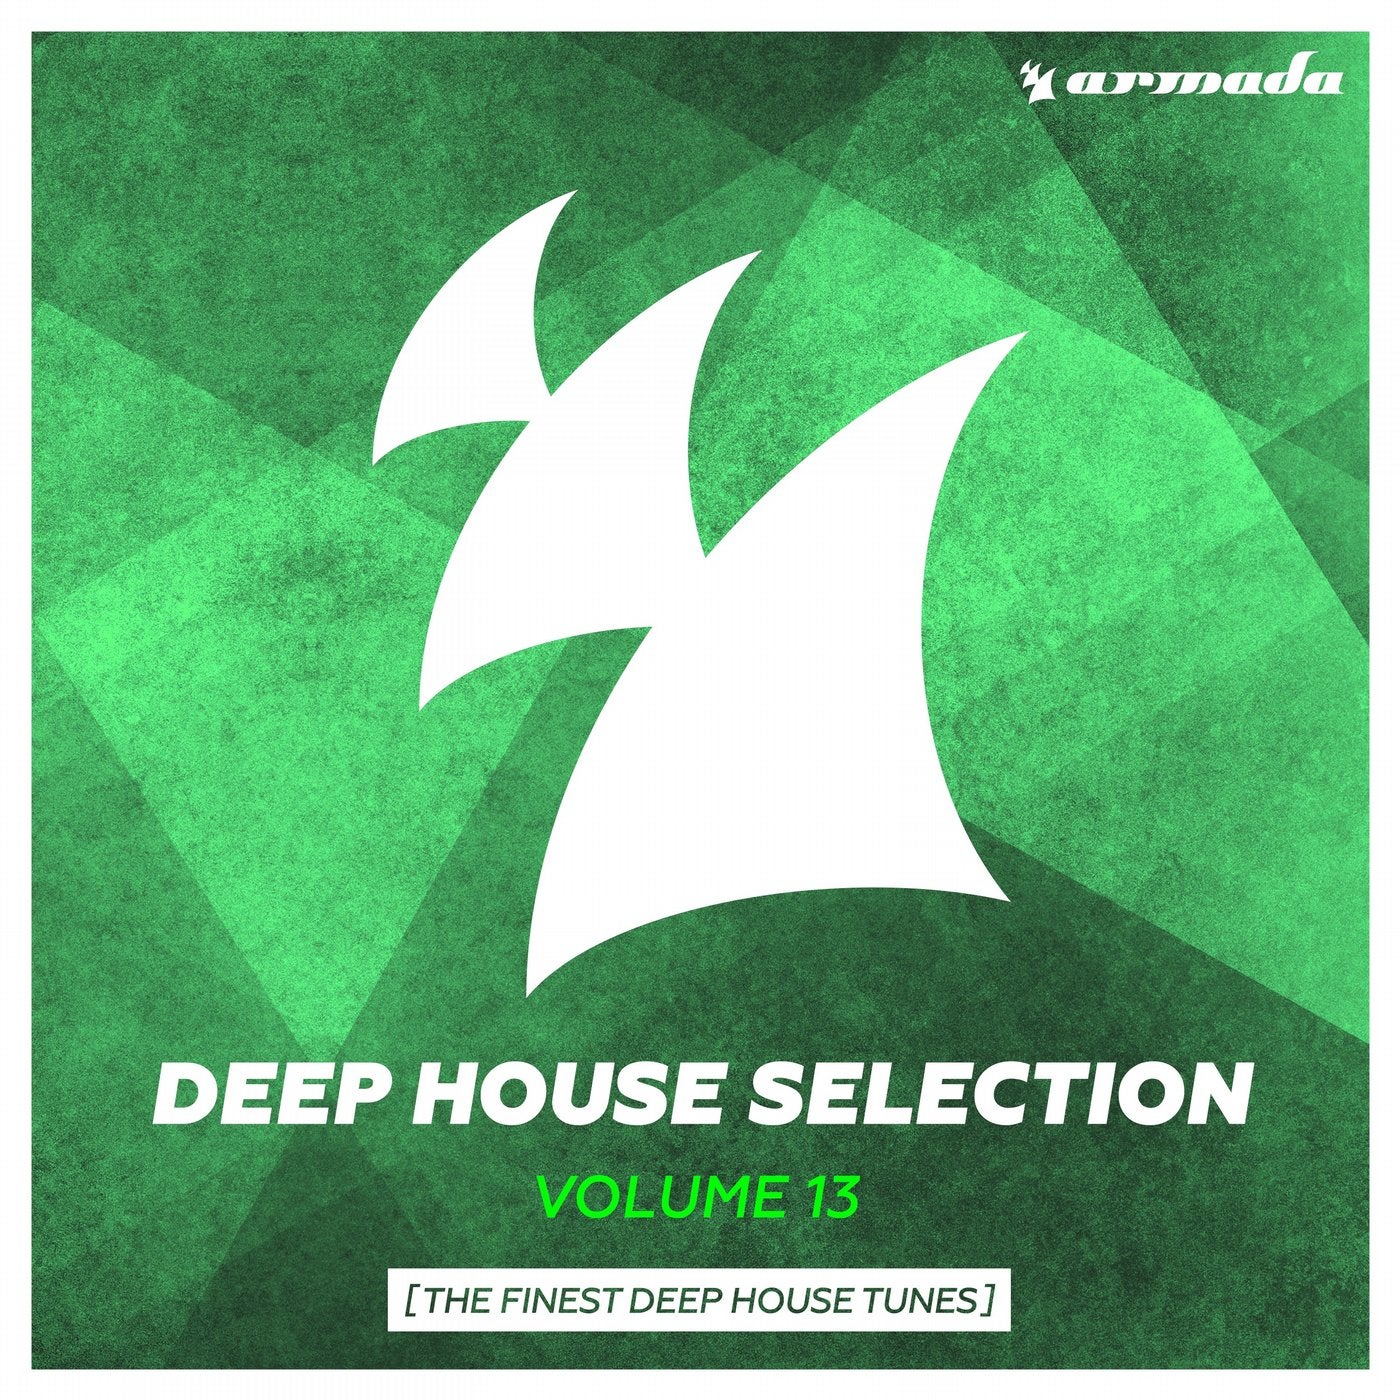 Armada Deep House Selection, Vol. 13 (The Finest Deep House Tunes) - Extended Versions